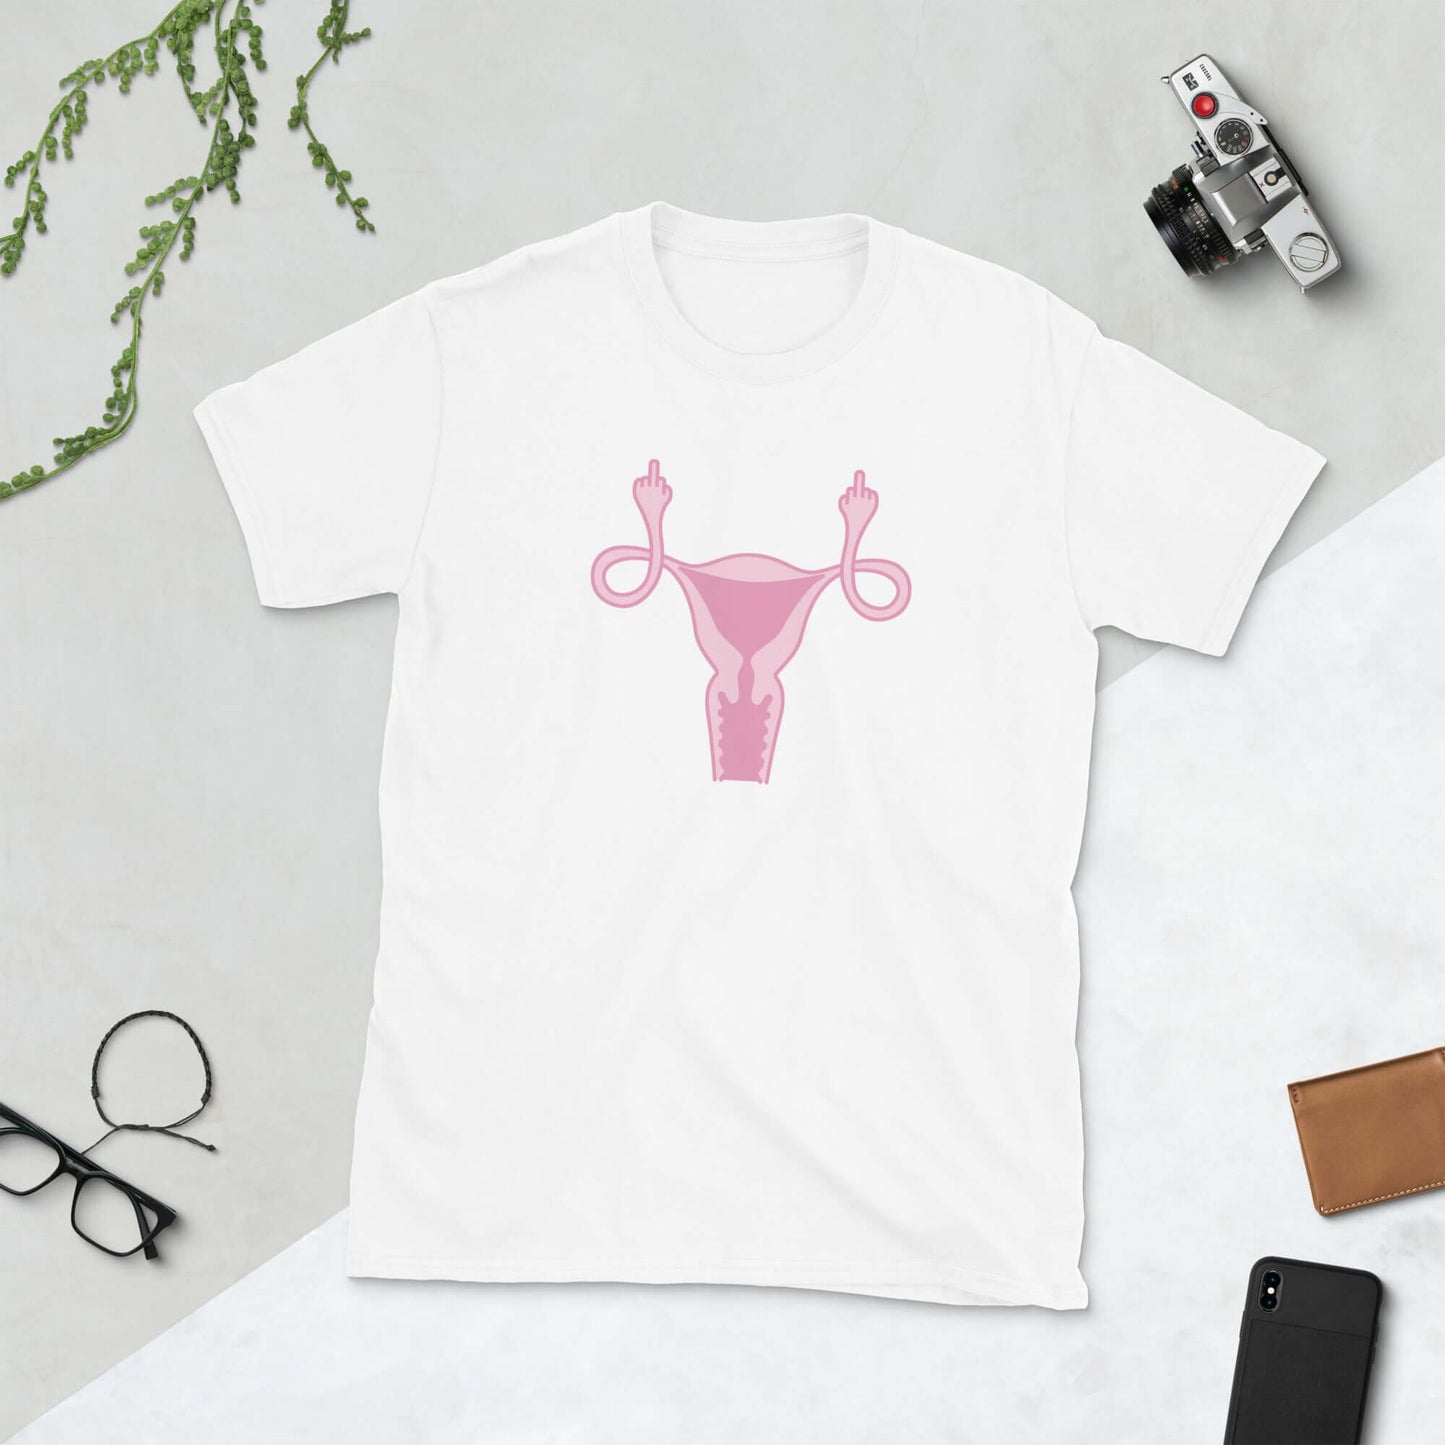 Angry uterus flipping middle finger T-shirt